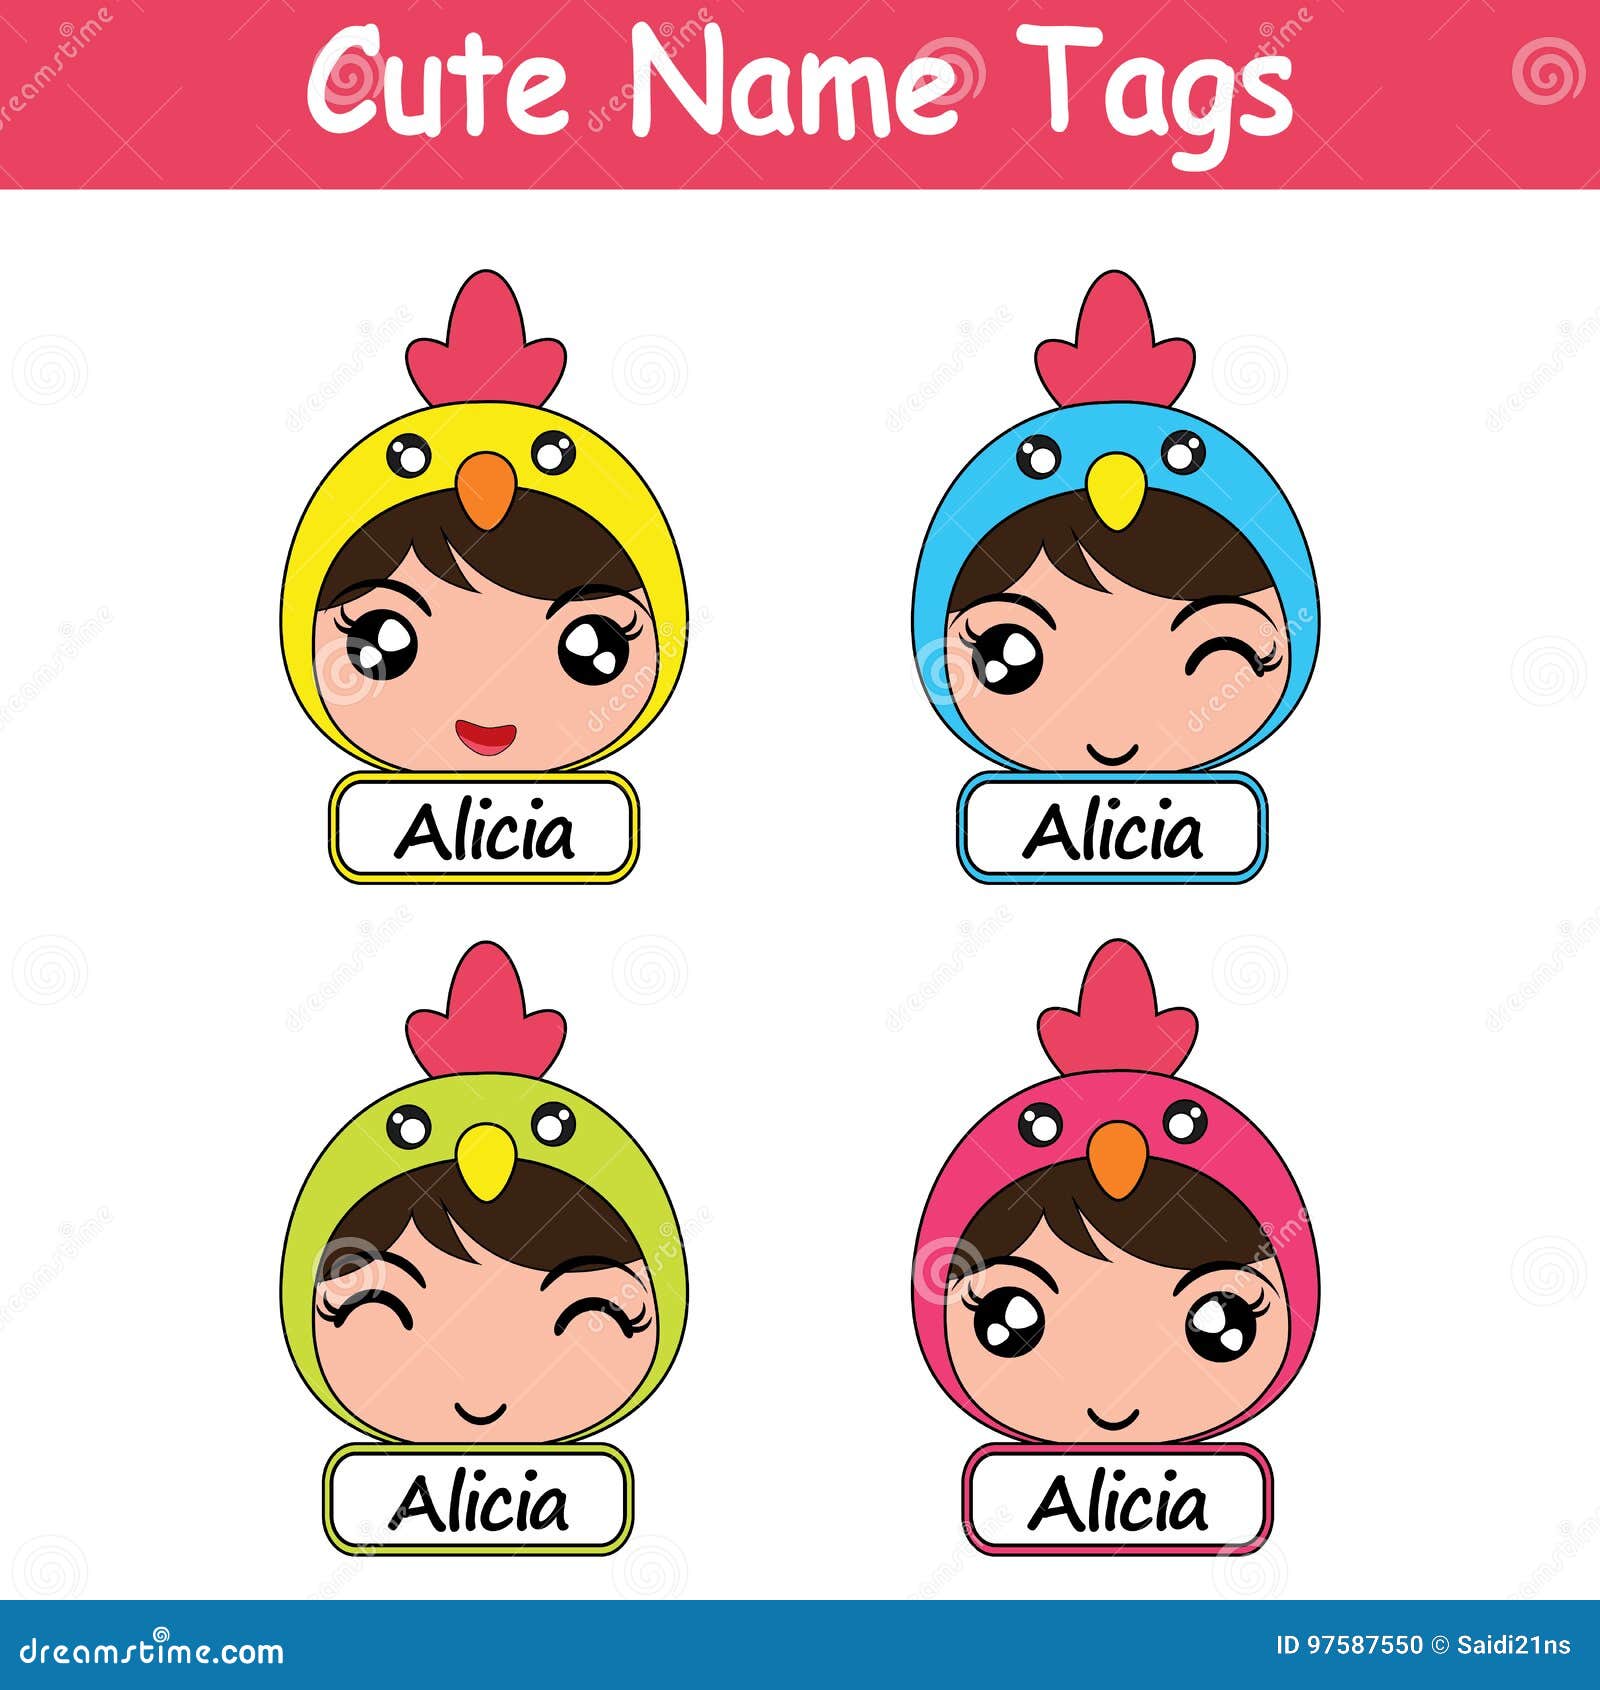 Cute Name Tags Cartoon Illustration With Cute Colorful Chick Girls Suitable  For Kid Name Tags Design Stock Vector - Illustration Of Portrait, Cartoon:  97587550